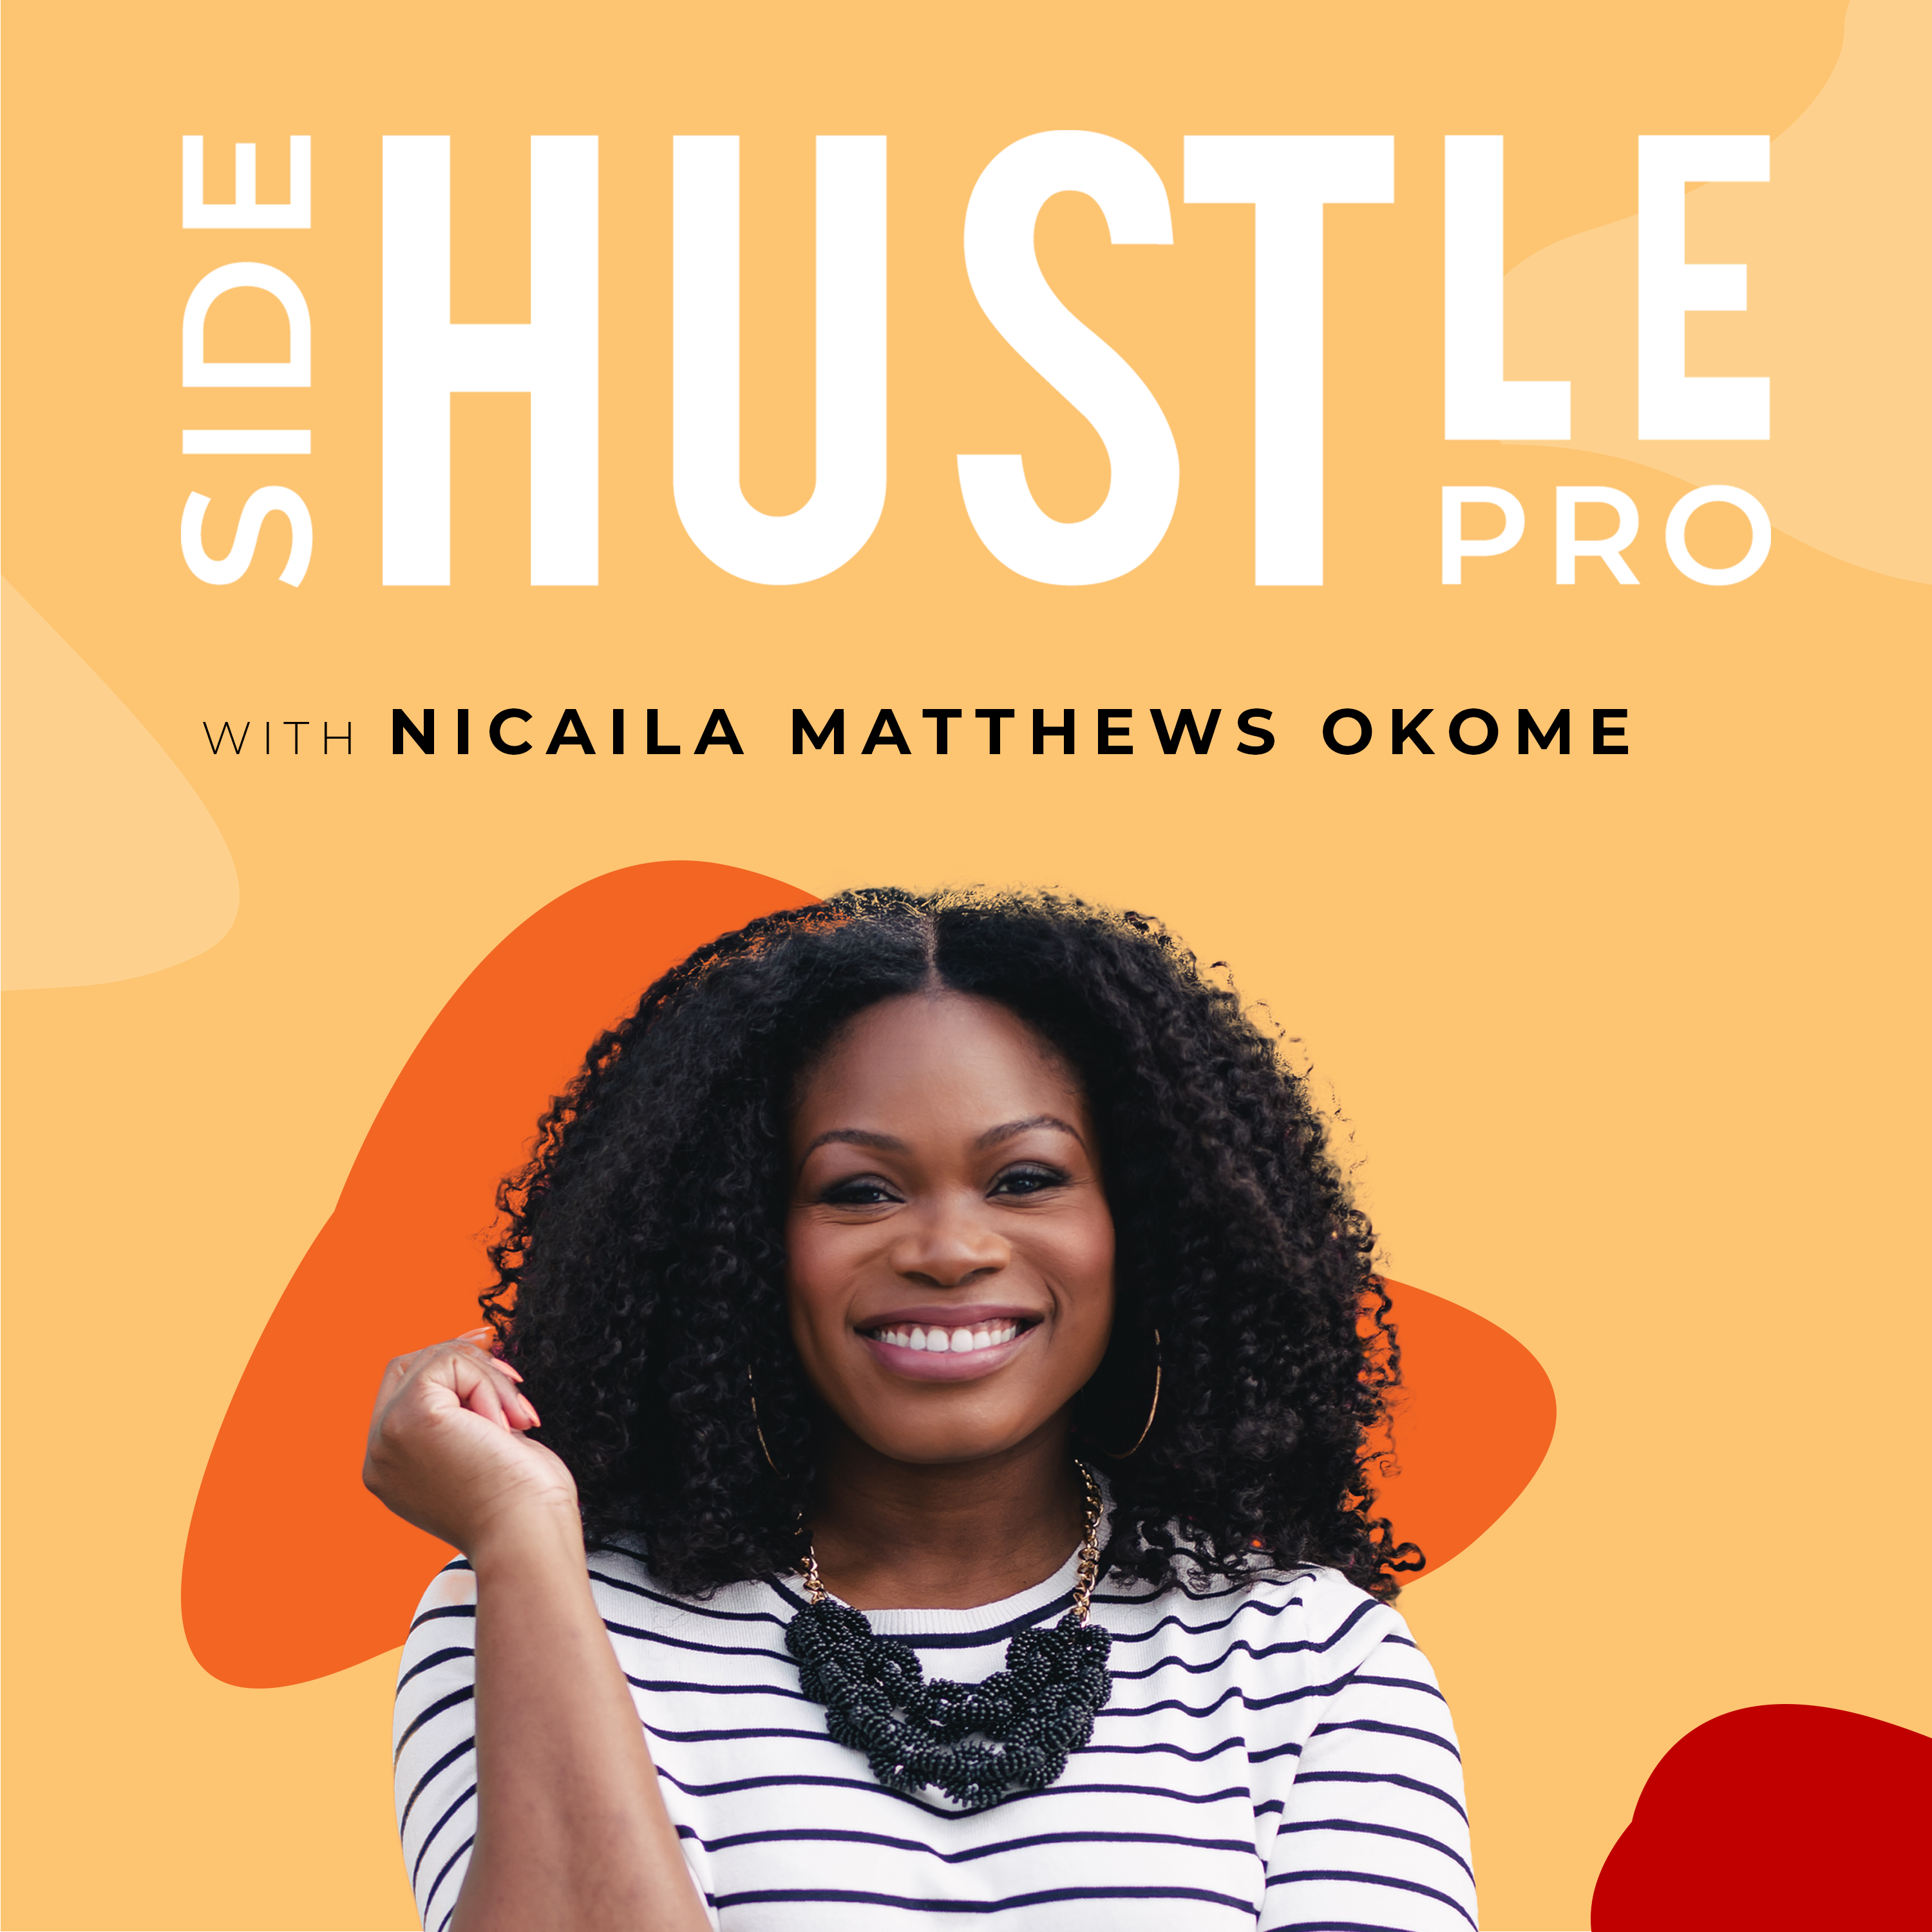 260: Getting Started With Facebook Ads For Your Side Hustle